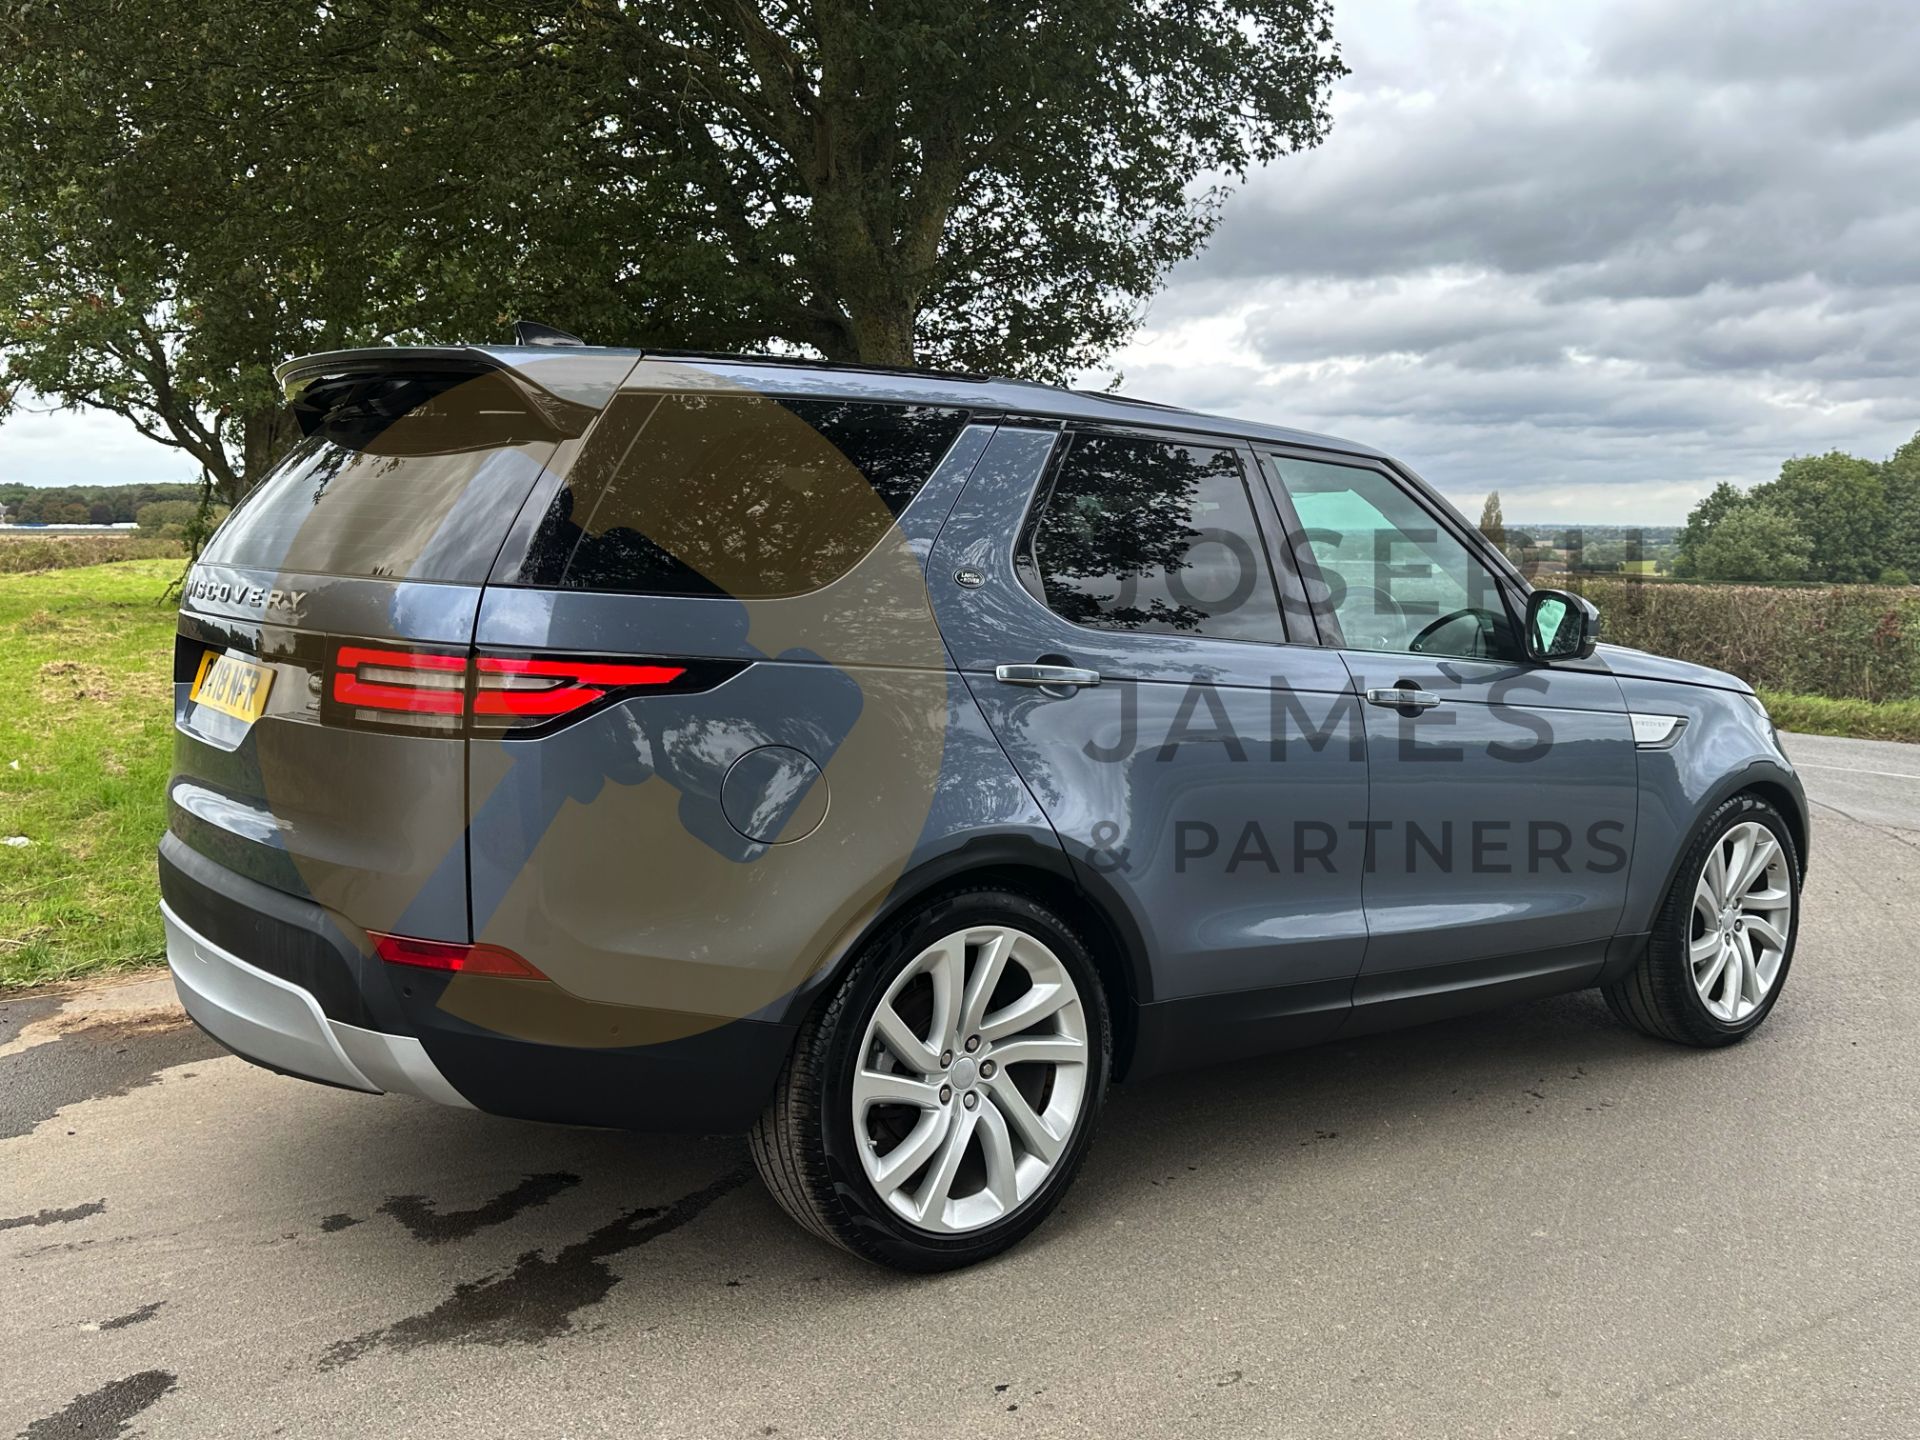 (ON SALE) LAND ROVER DISCOVERY 5 *HSE LUXURY* 7 SEATER SUV (2018 - FACELIFT MODEL) (LOW MILEAGE) - Image 13 of 66